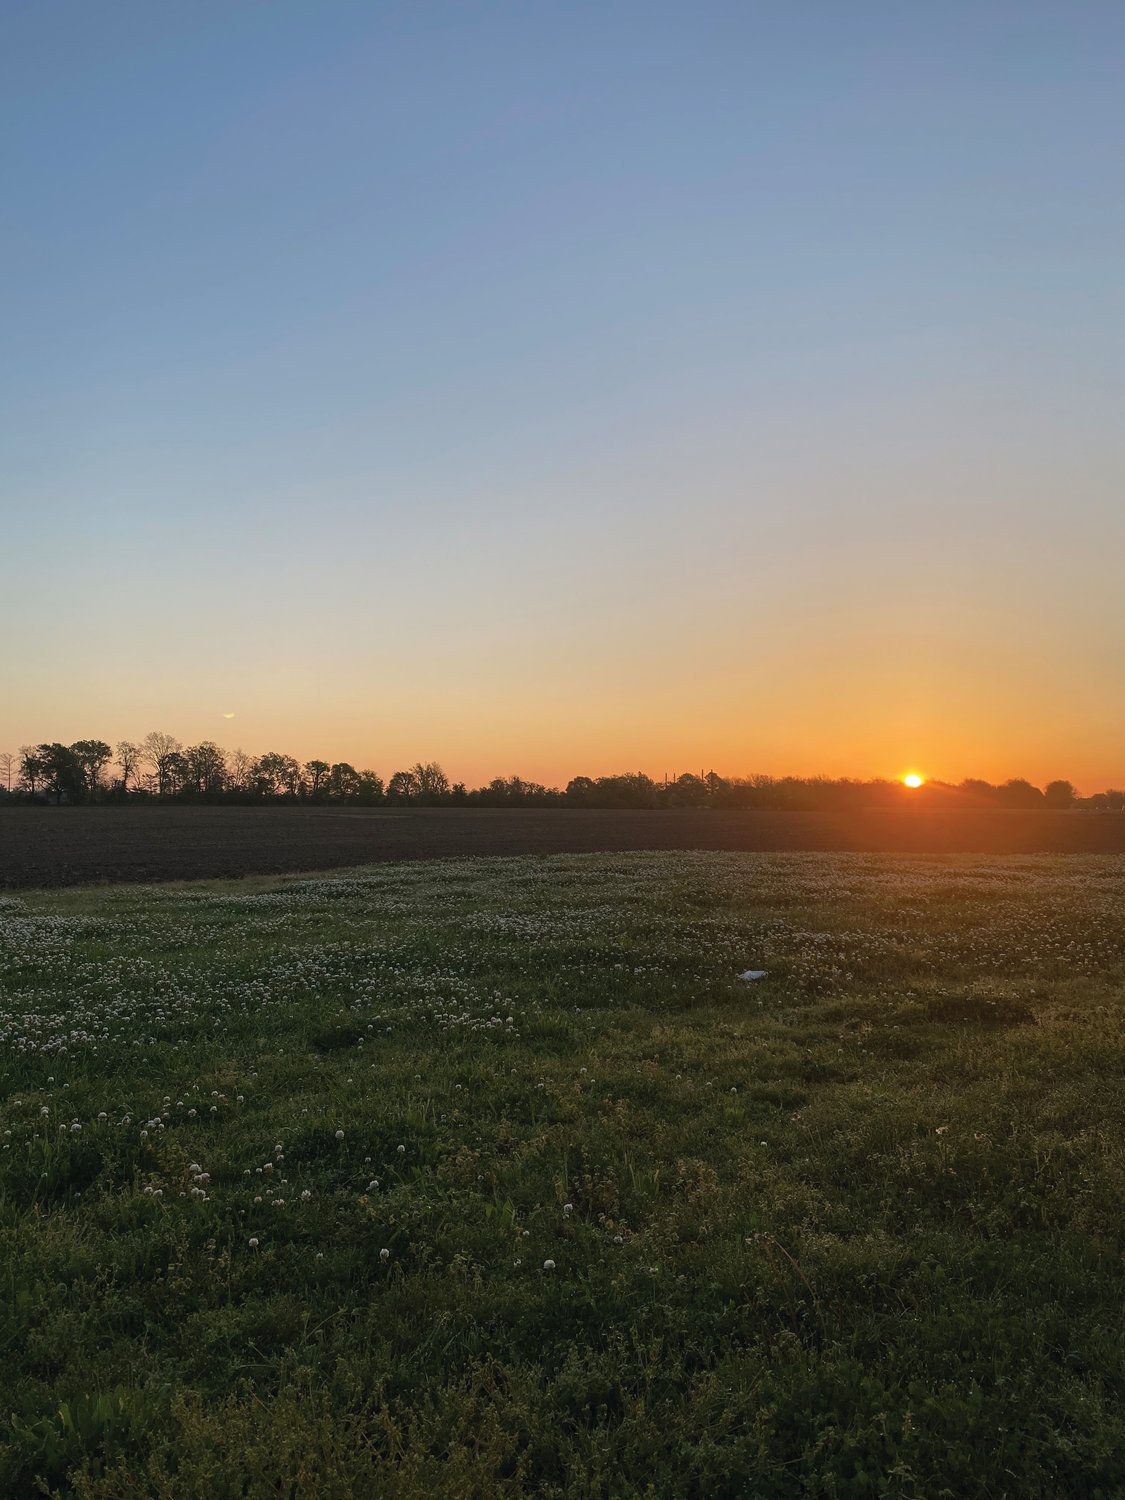 Reinke saw a variety of landscapes and experienced various climate changes during his solo cycle across the country. Above, a sunrise over the Mississippi Delta.